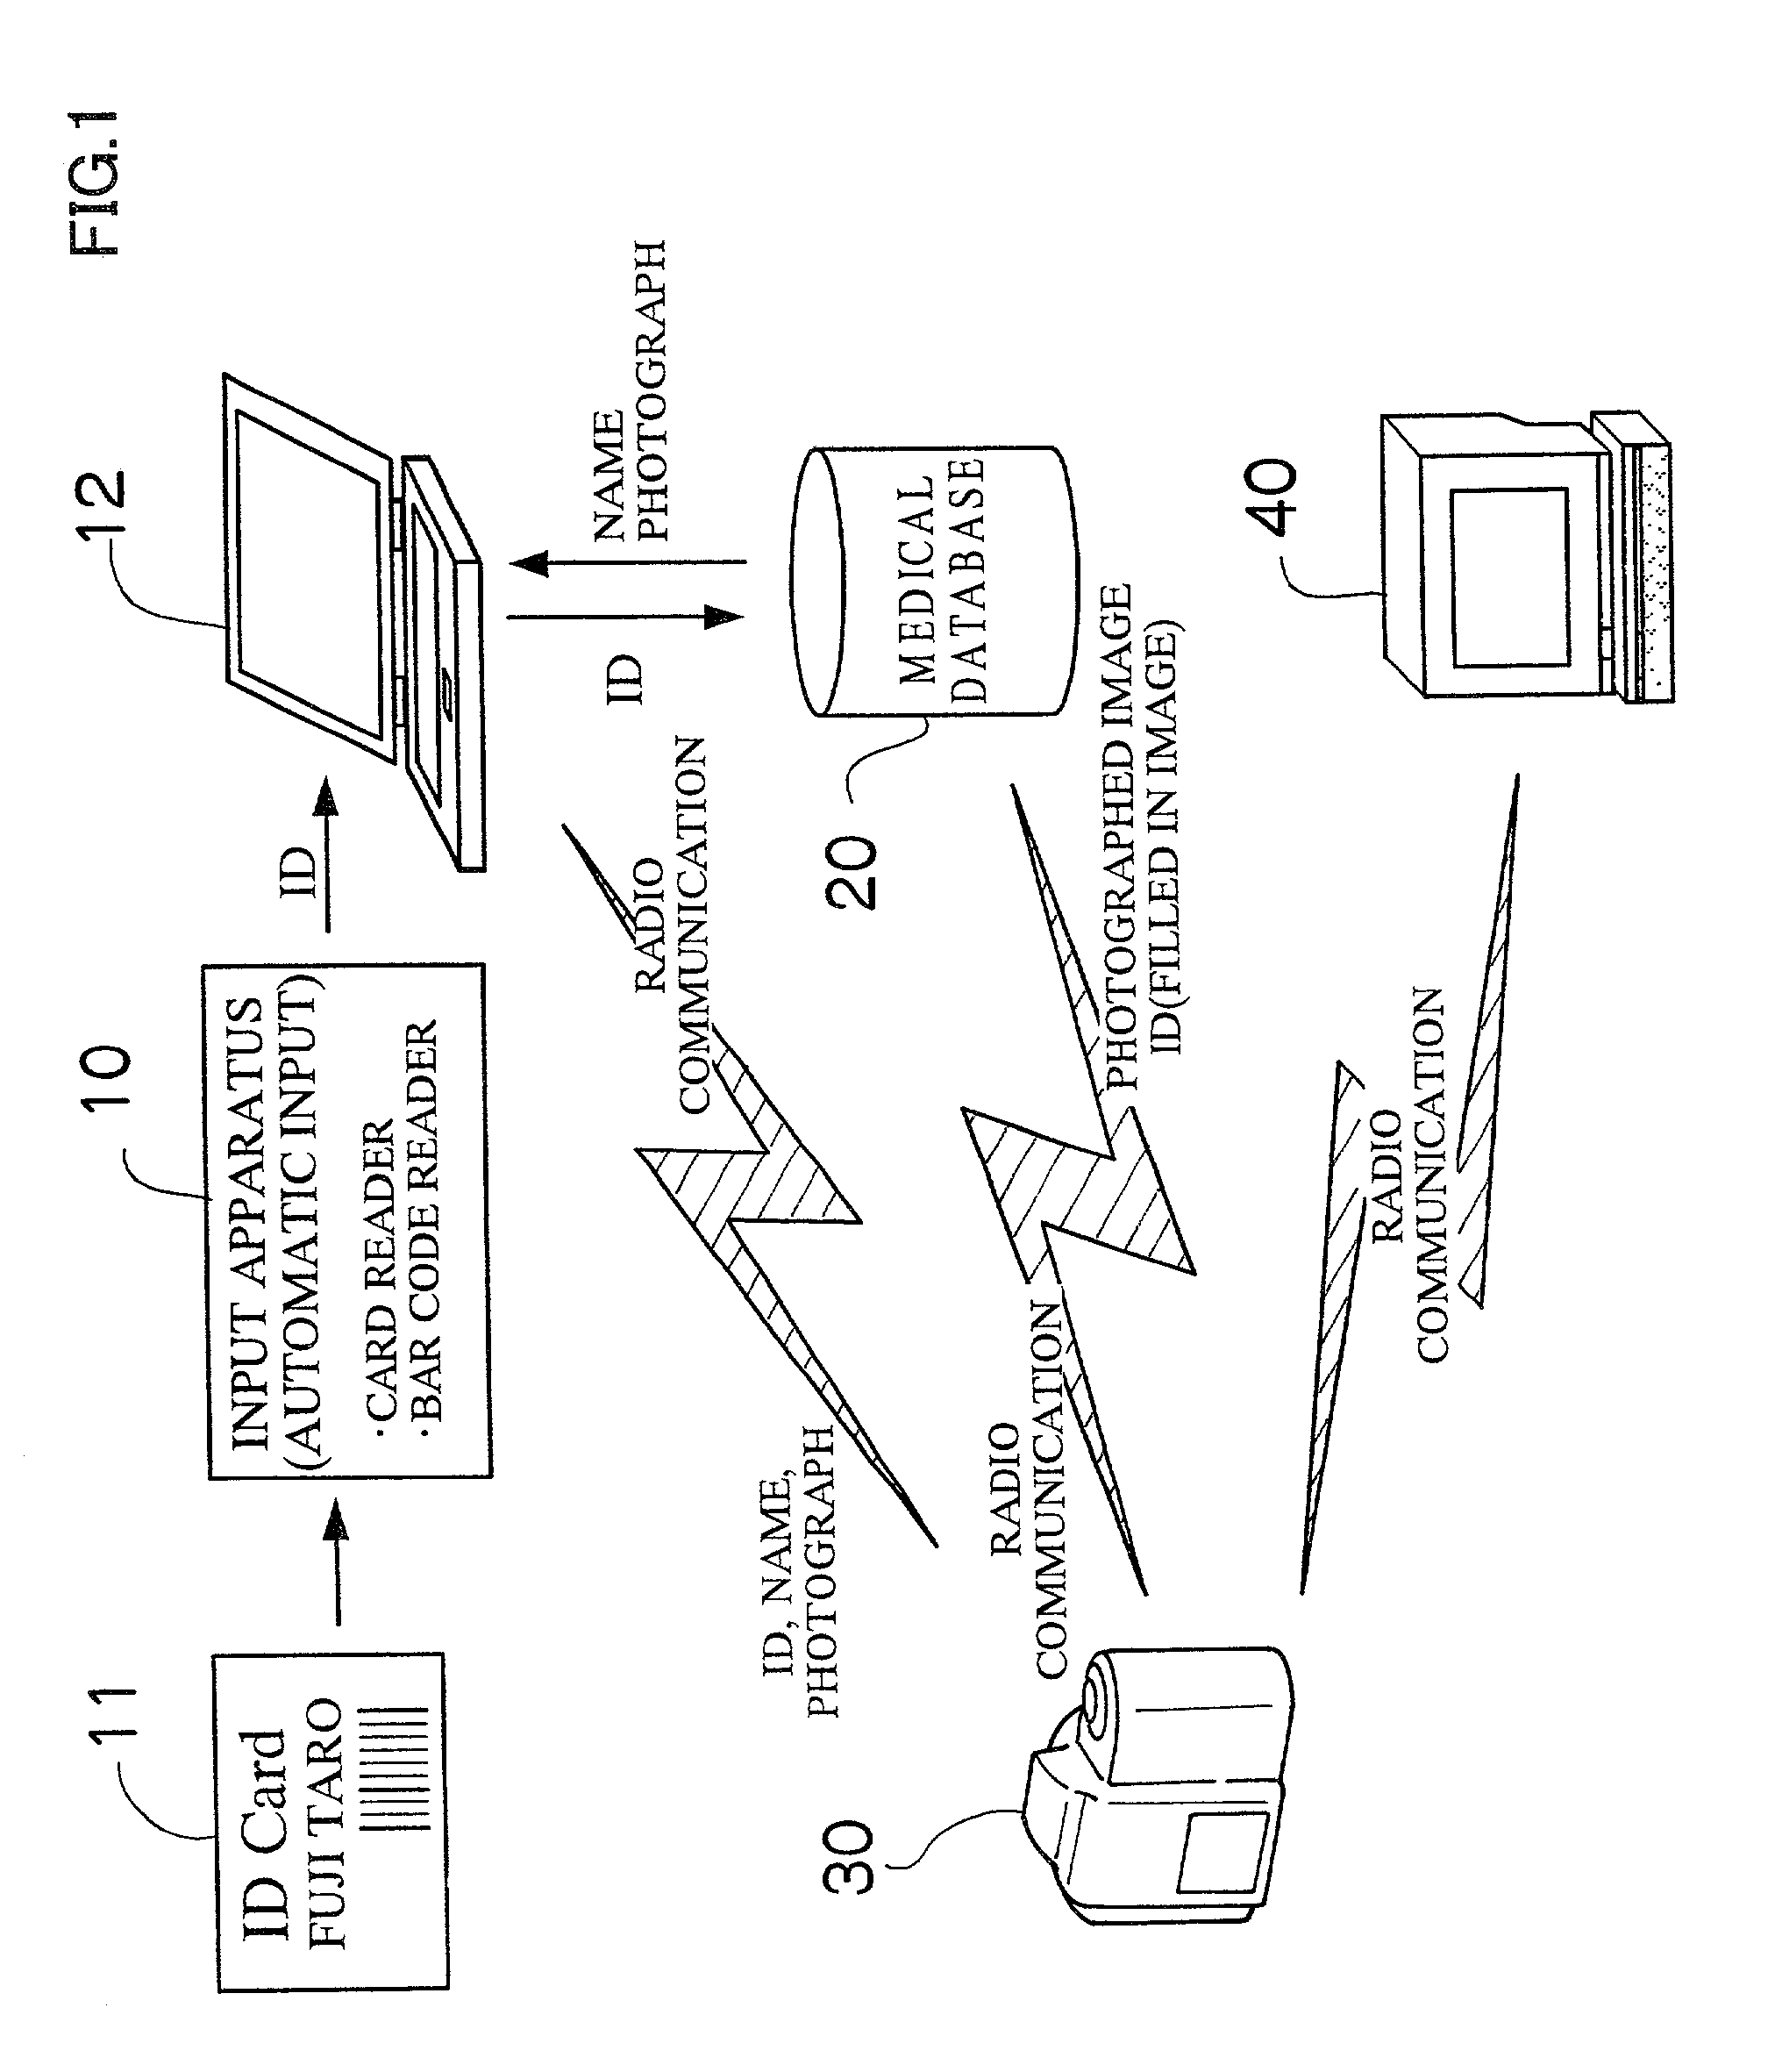 Image recording method and system, image transmitting method, and image recording apparatus